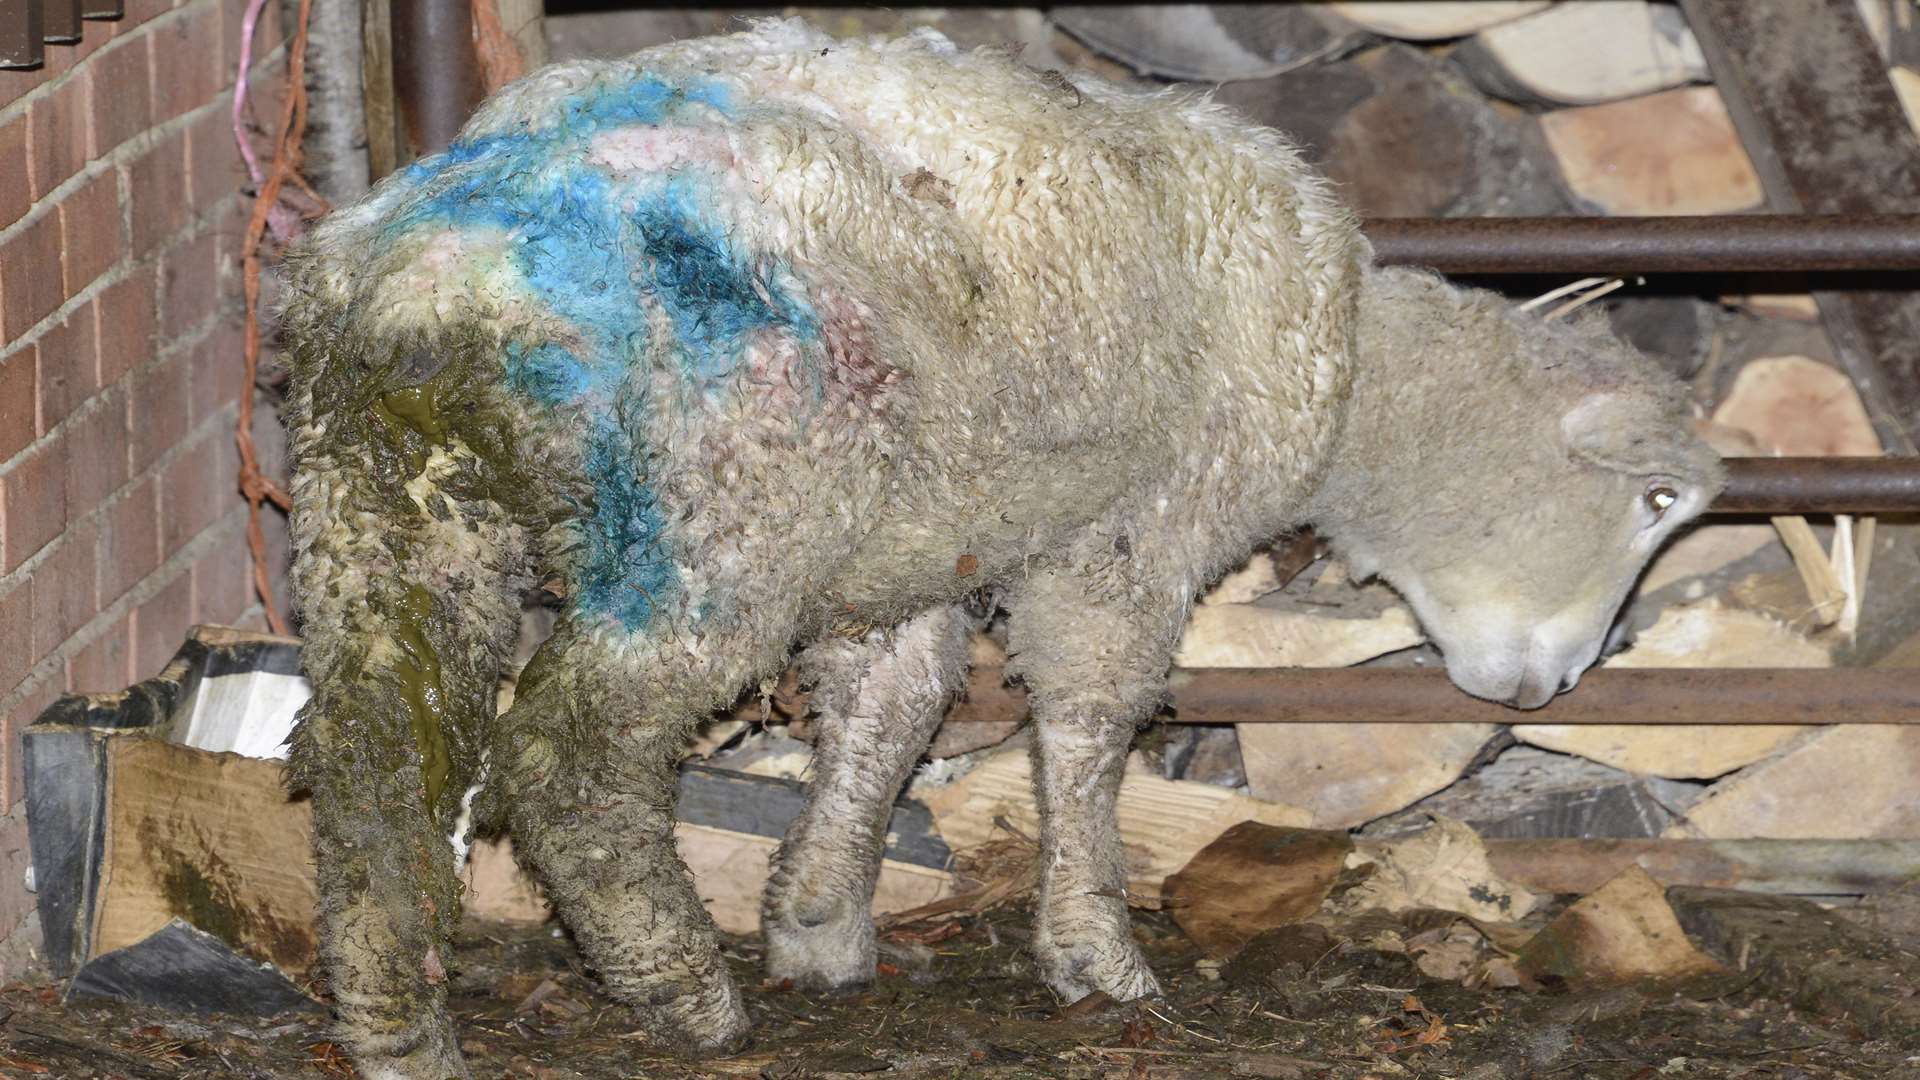 A sickly sheep after the attack